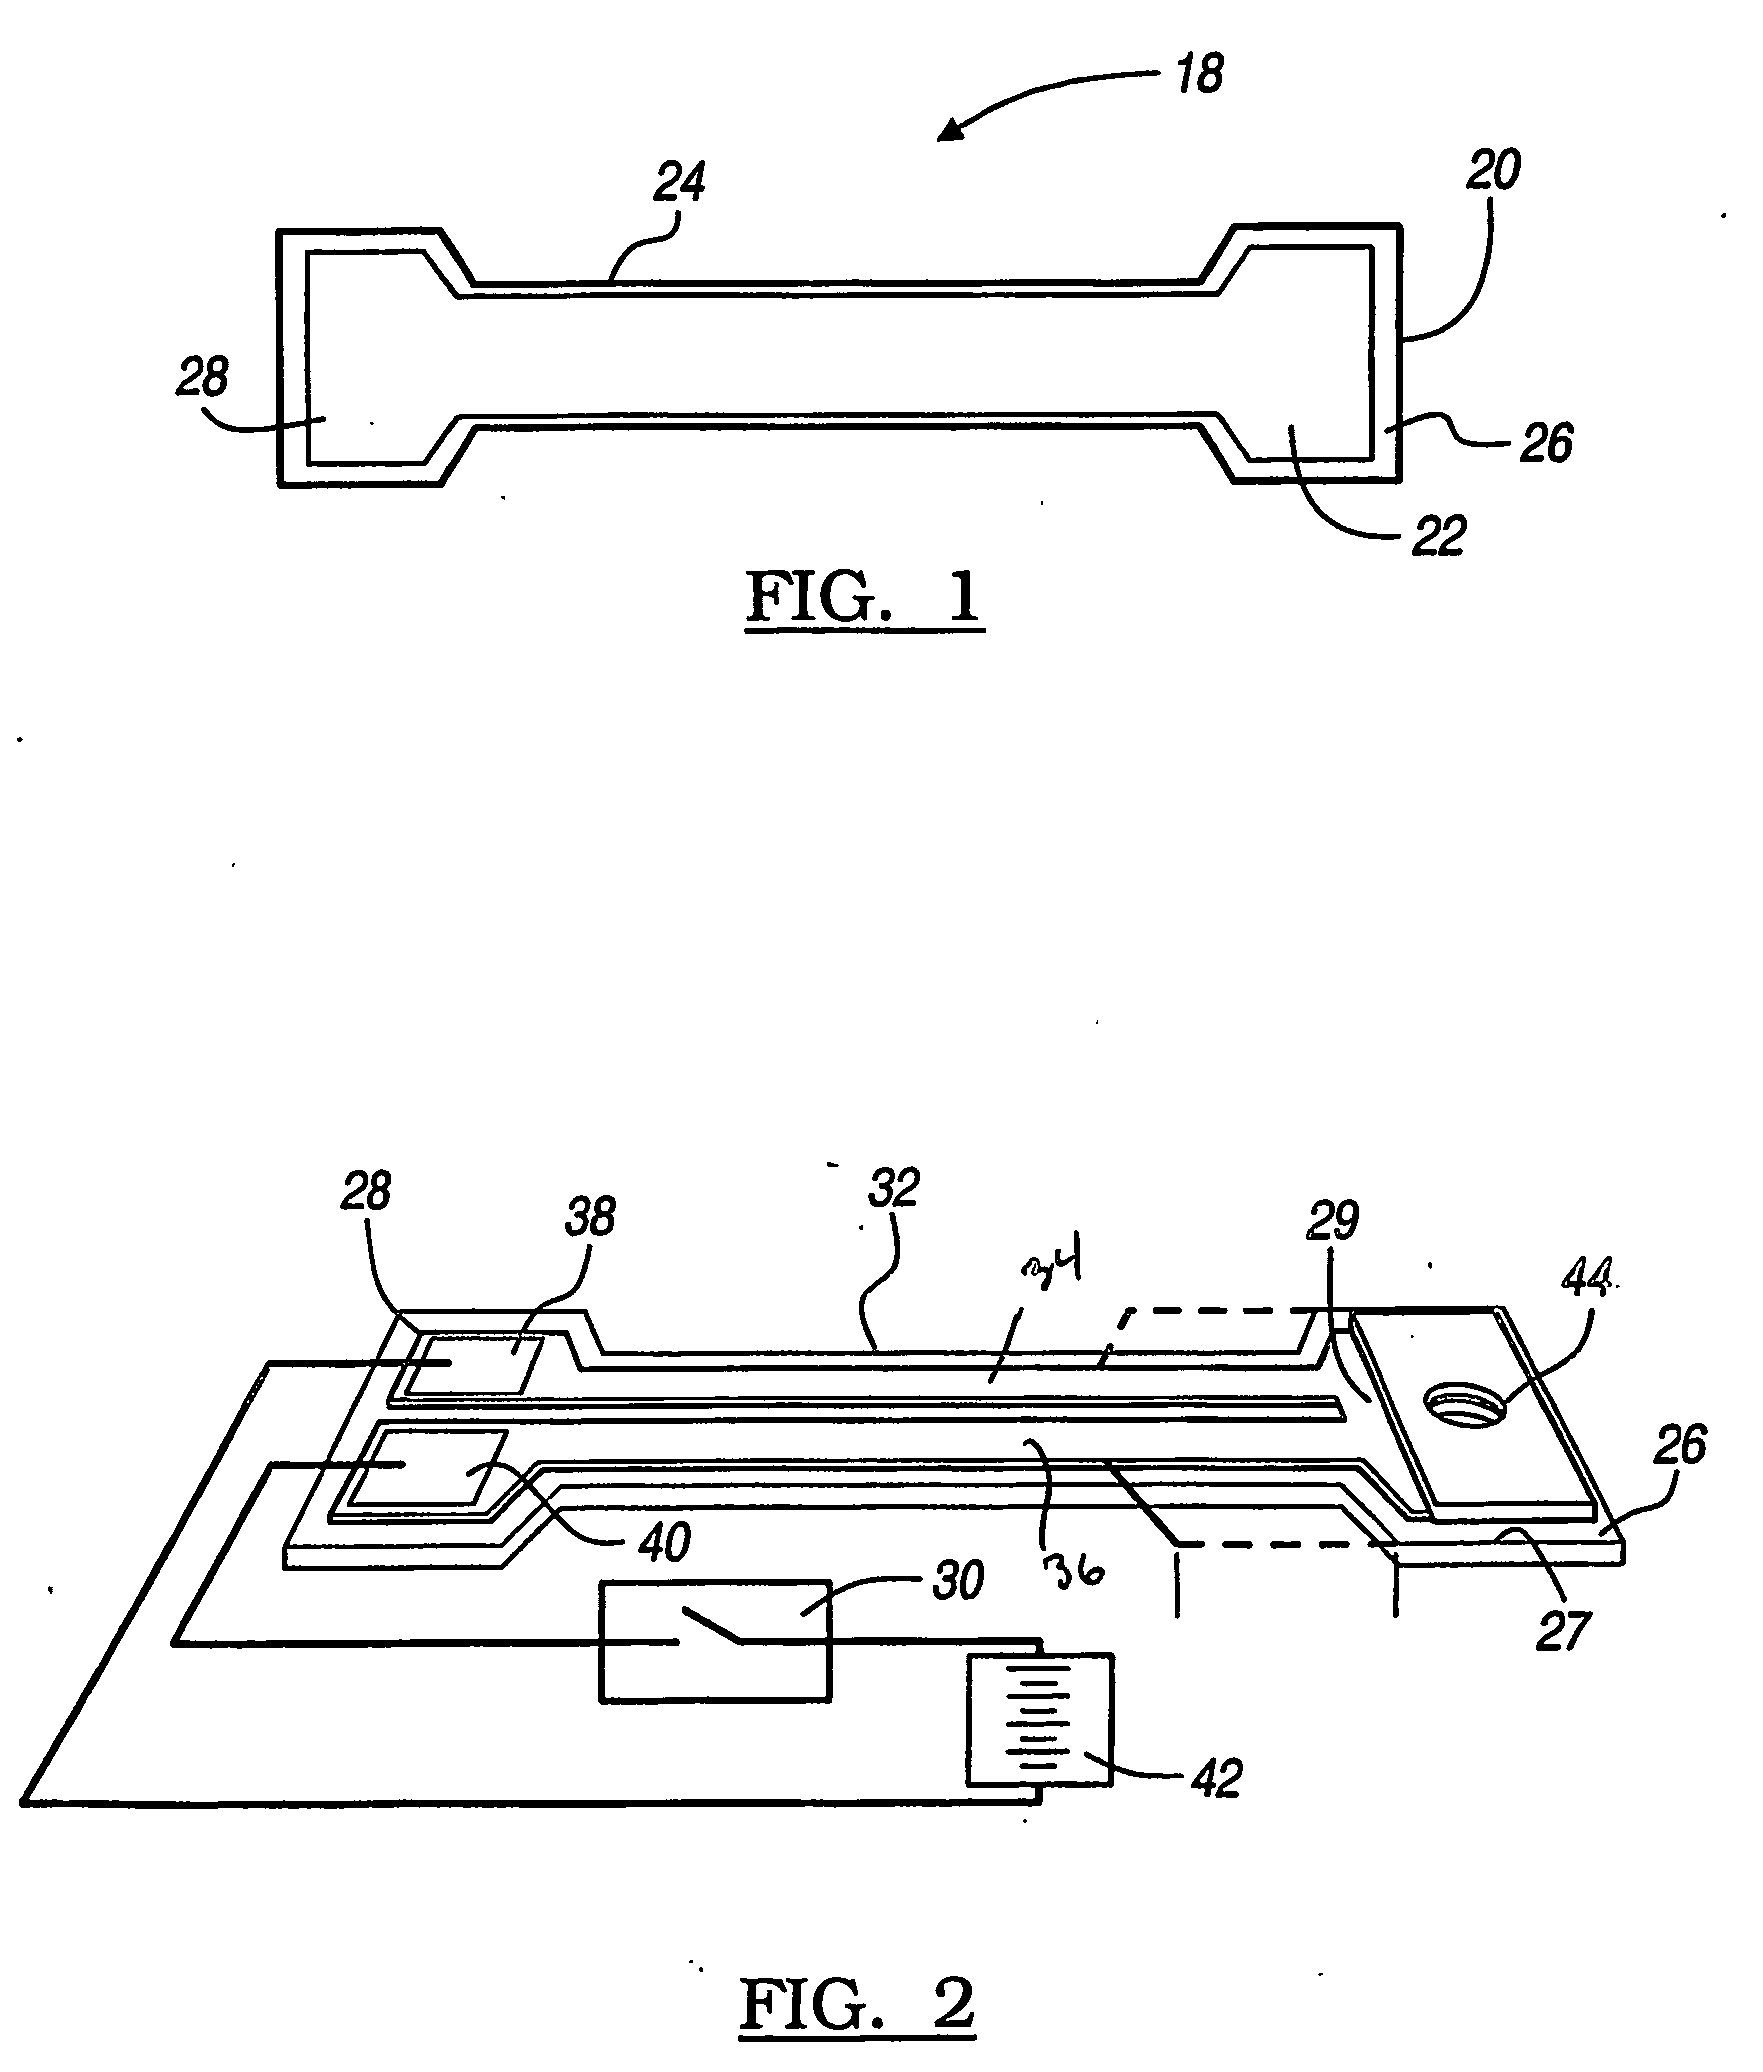 Prestrained thin-film shape memory actuator using polymeric substrates